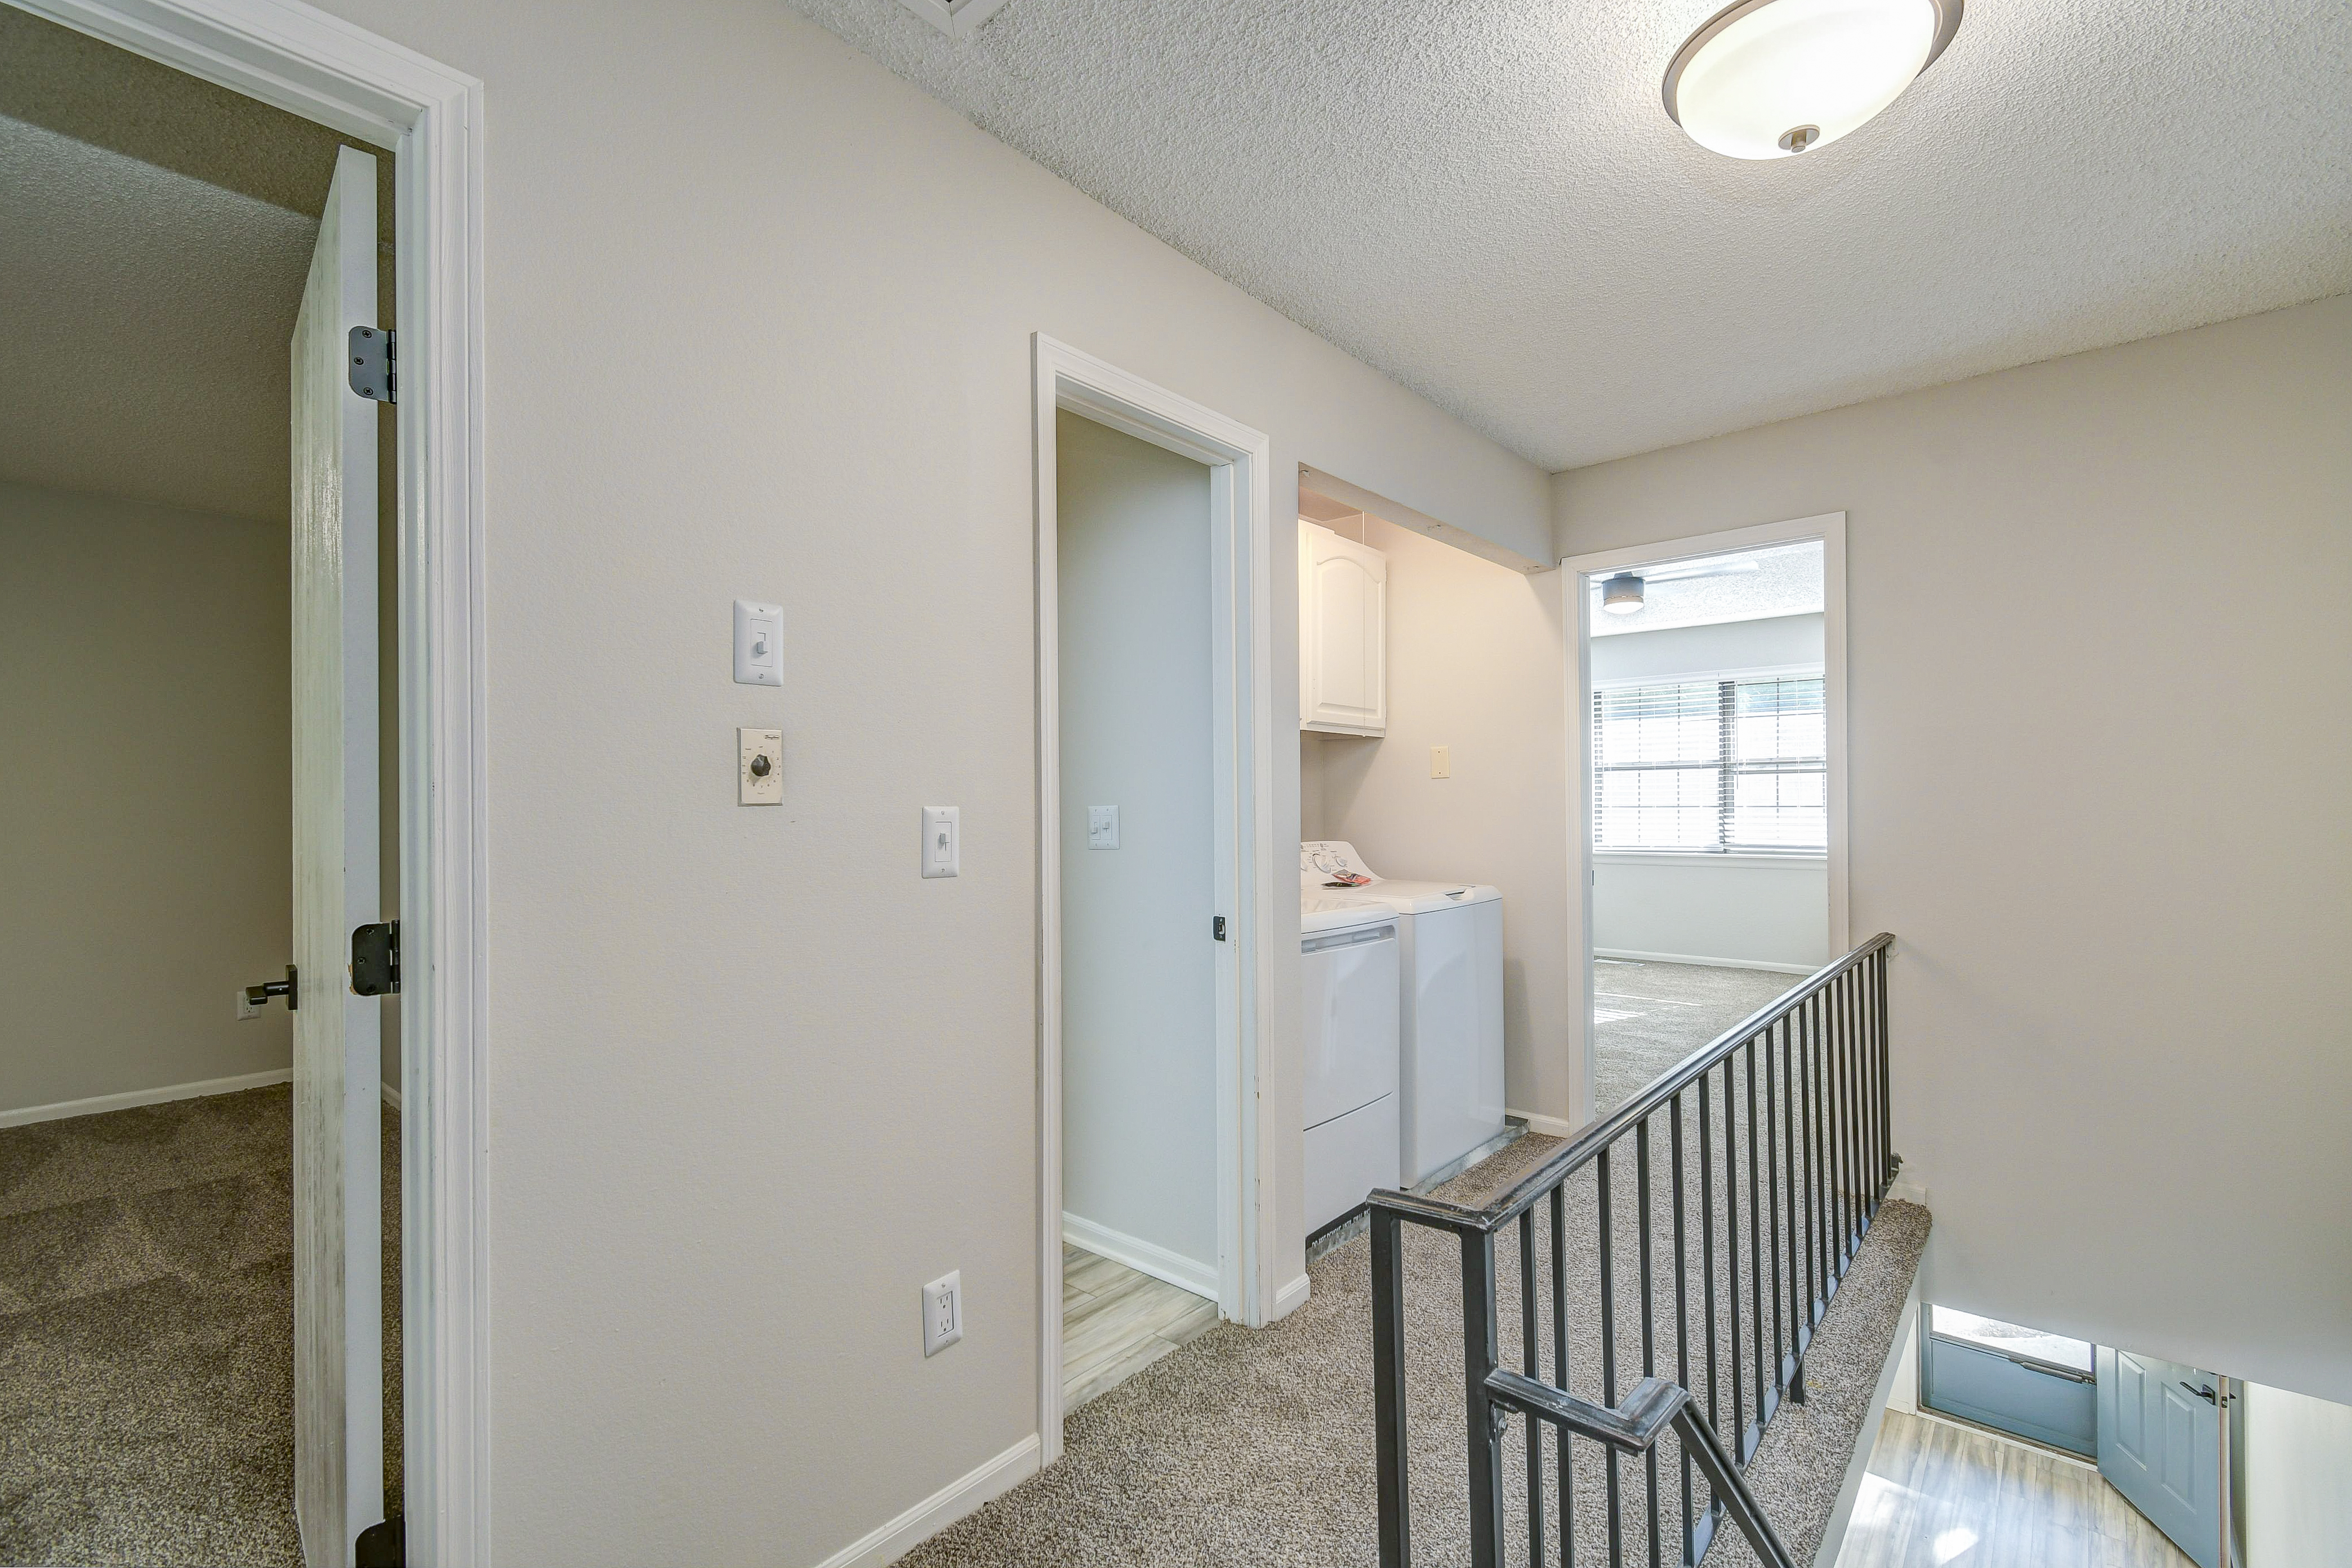 Second floor hallway and railing in townhome platinum interior at The Arbor in Blue Springs, MO